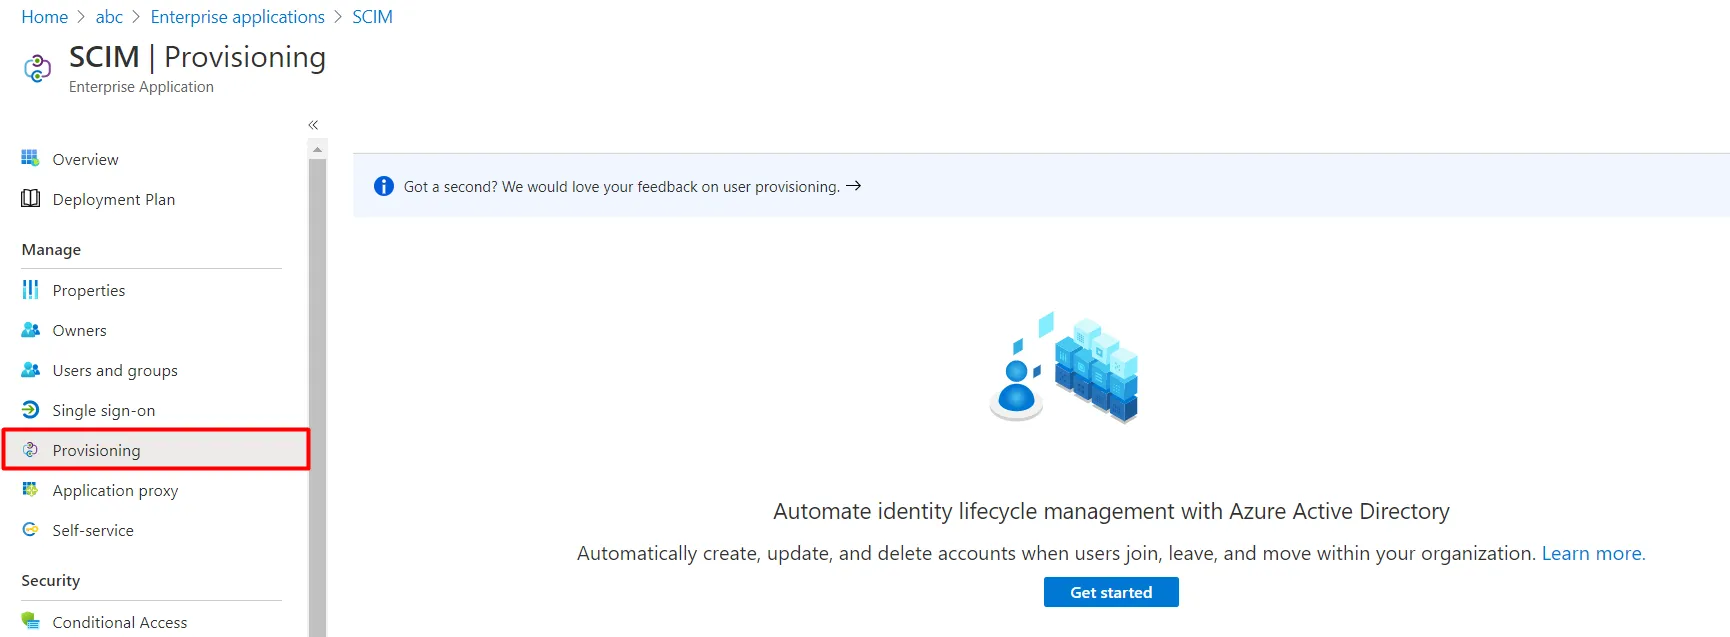 User provisioning with Azure AD of SCIM Standard- Provisioning screen to manage user account